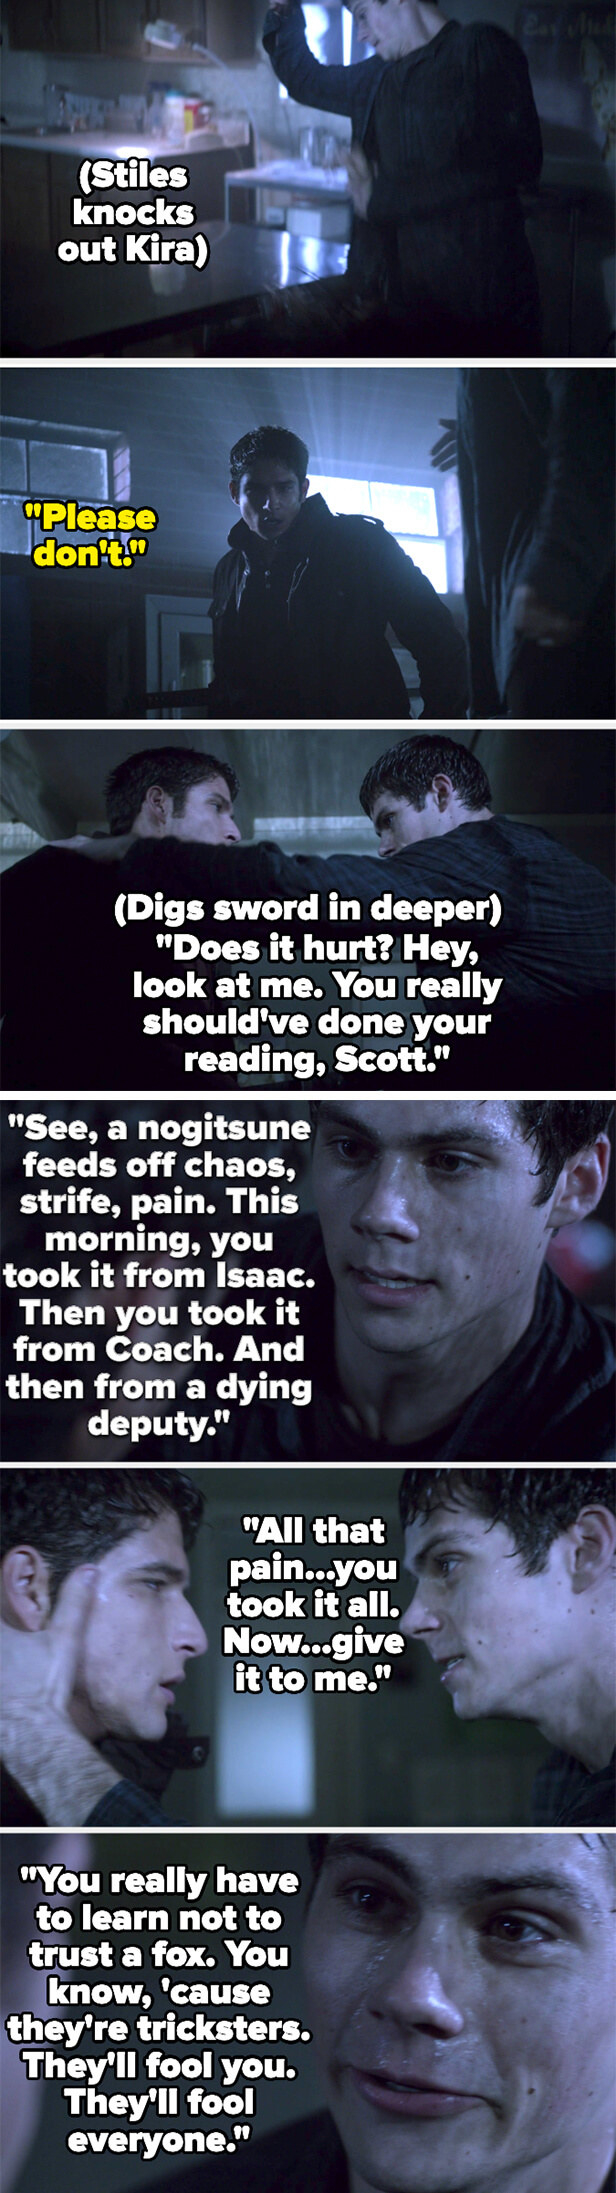 the nogitsune (as Stiles) knocks Kira out then twists the sword in Scott&#x27;s stomach, saying he had scott take people&#x27;s pain all day so he could give it to the nogitsune, who feeds off pain — he says scott should learn not to trust a fox